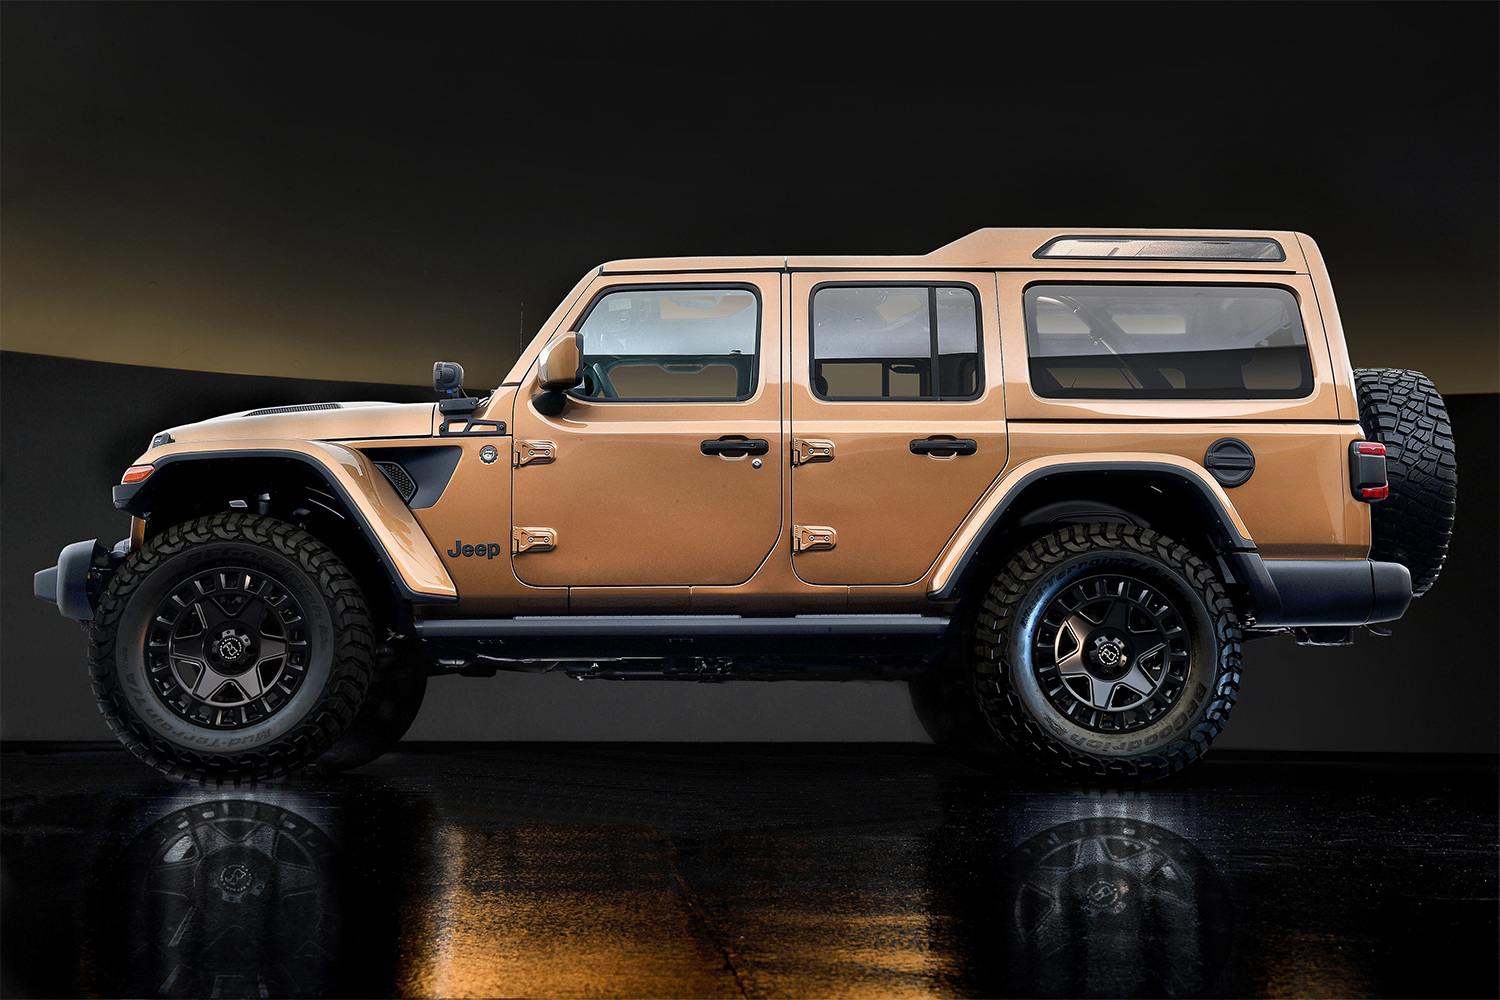 The Jeep Wrangler Sahara Overlook concept vehicle built by Mopar for SEMA 2021 featuring three rows of seats